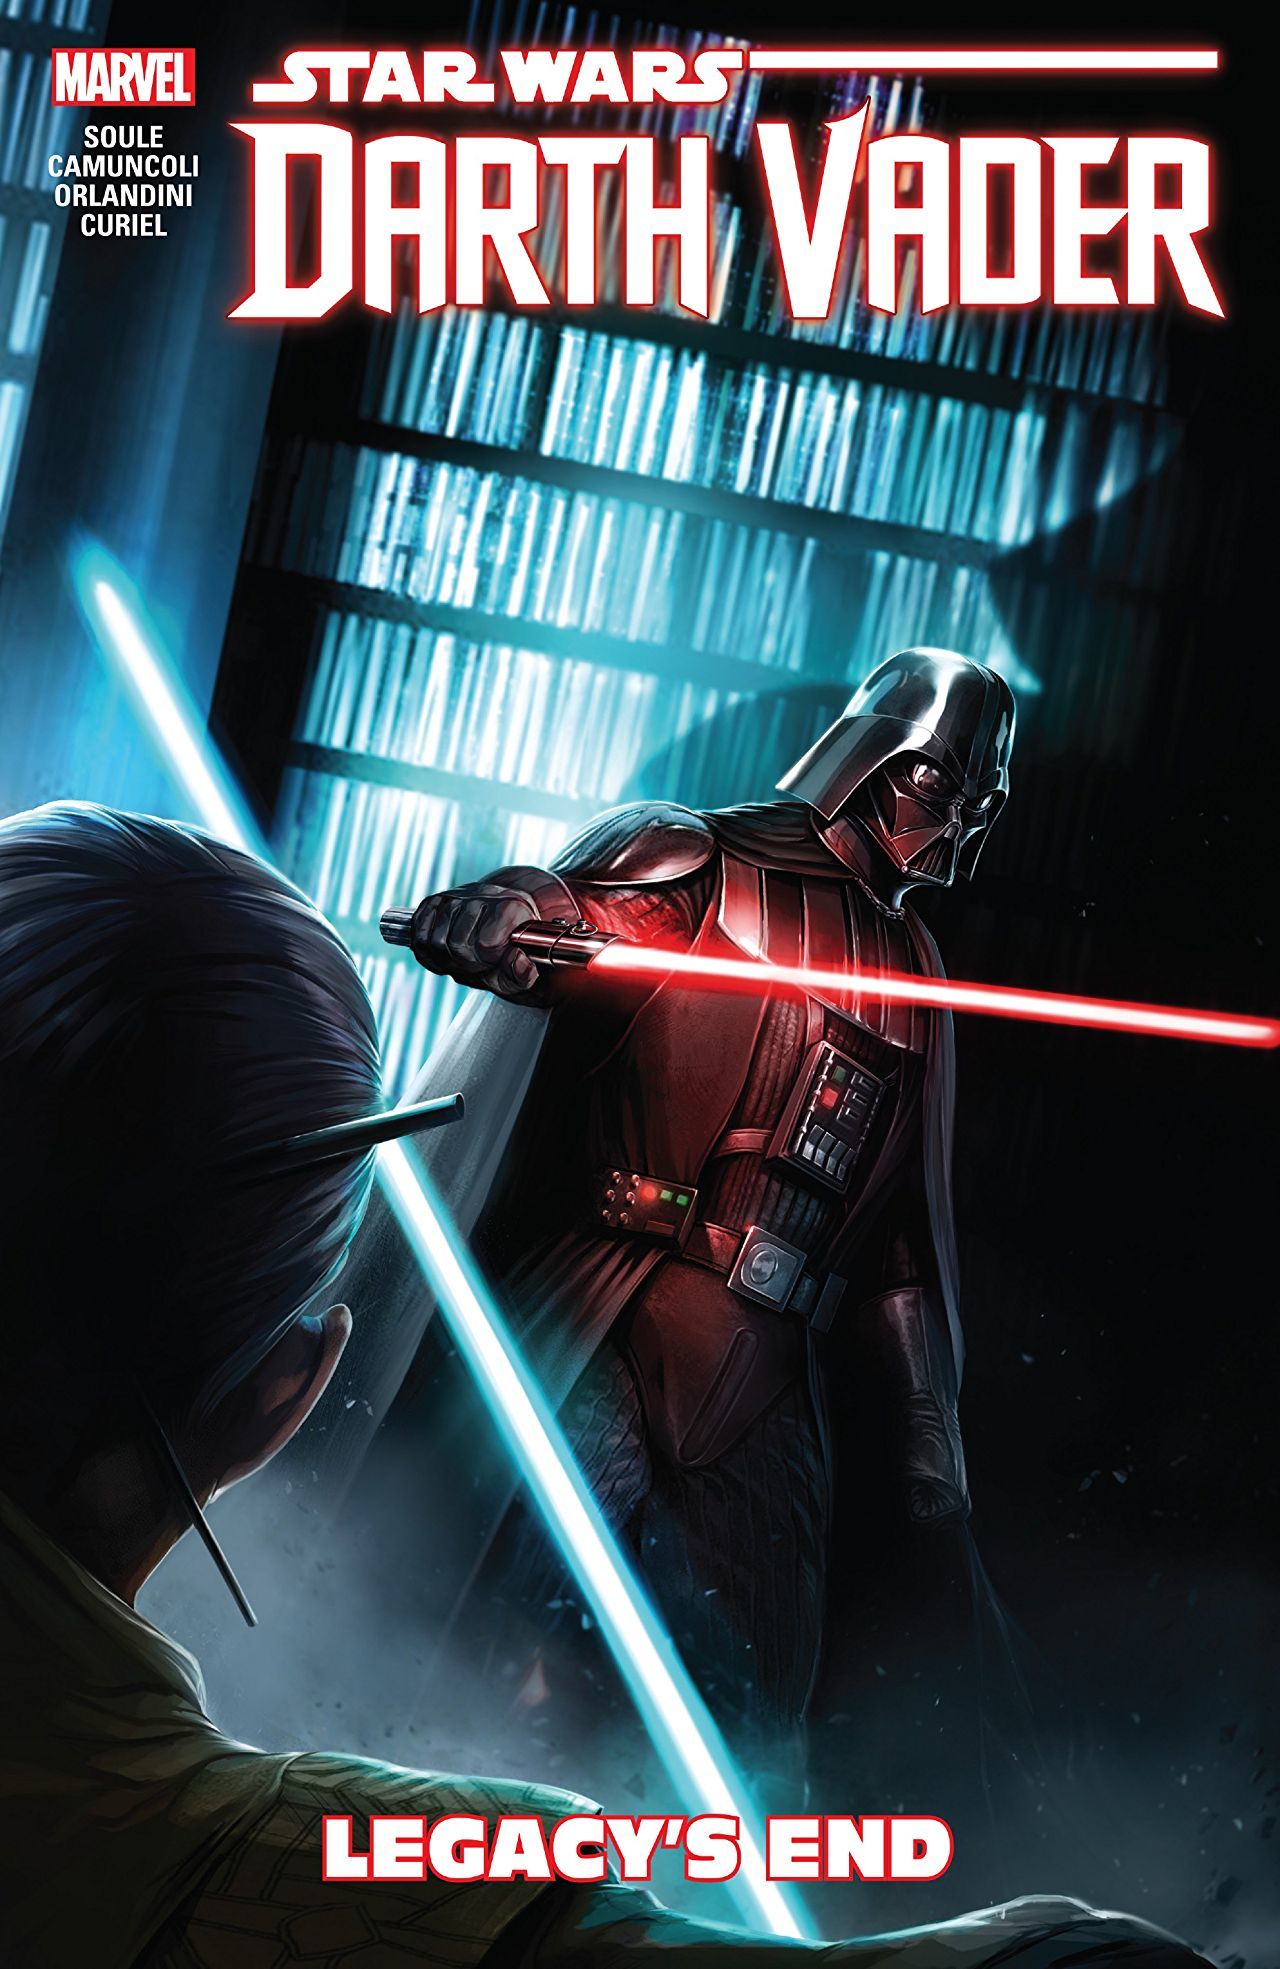 Star Wars: Darth Vader - Dark Lord of the Sith, Vol. 2: Legacy's End by Charles Soule